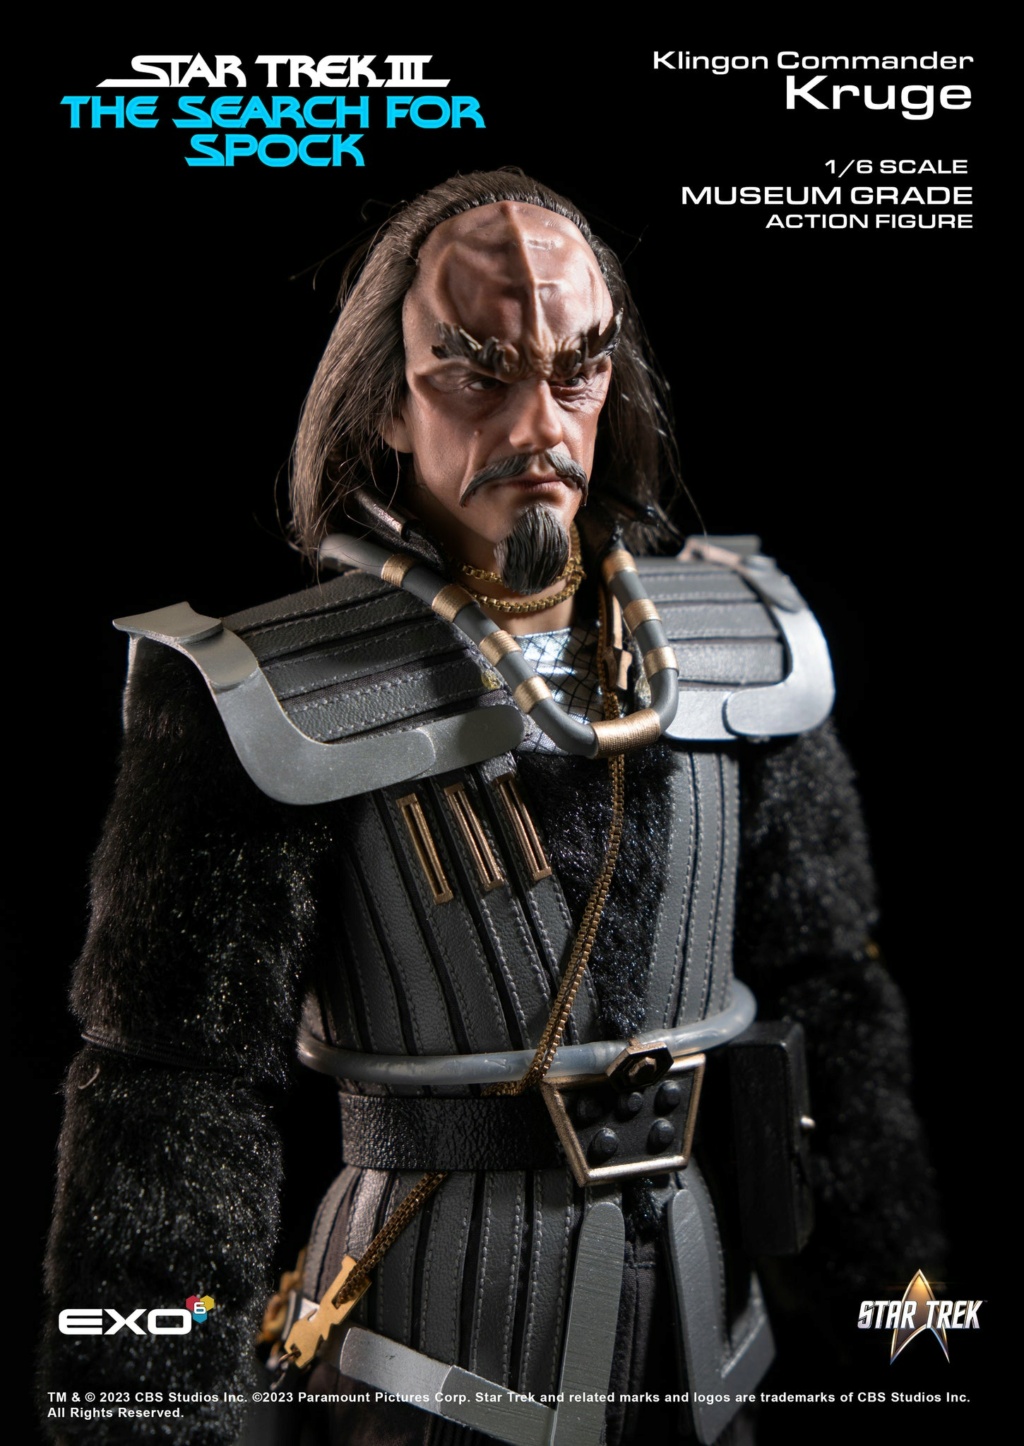 newproduct - NEW PRODUCT: EXO-6: Star Trek III: The Search For Spock: Klingon Commander Kruge 1/6 scale action figure 1463